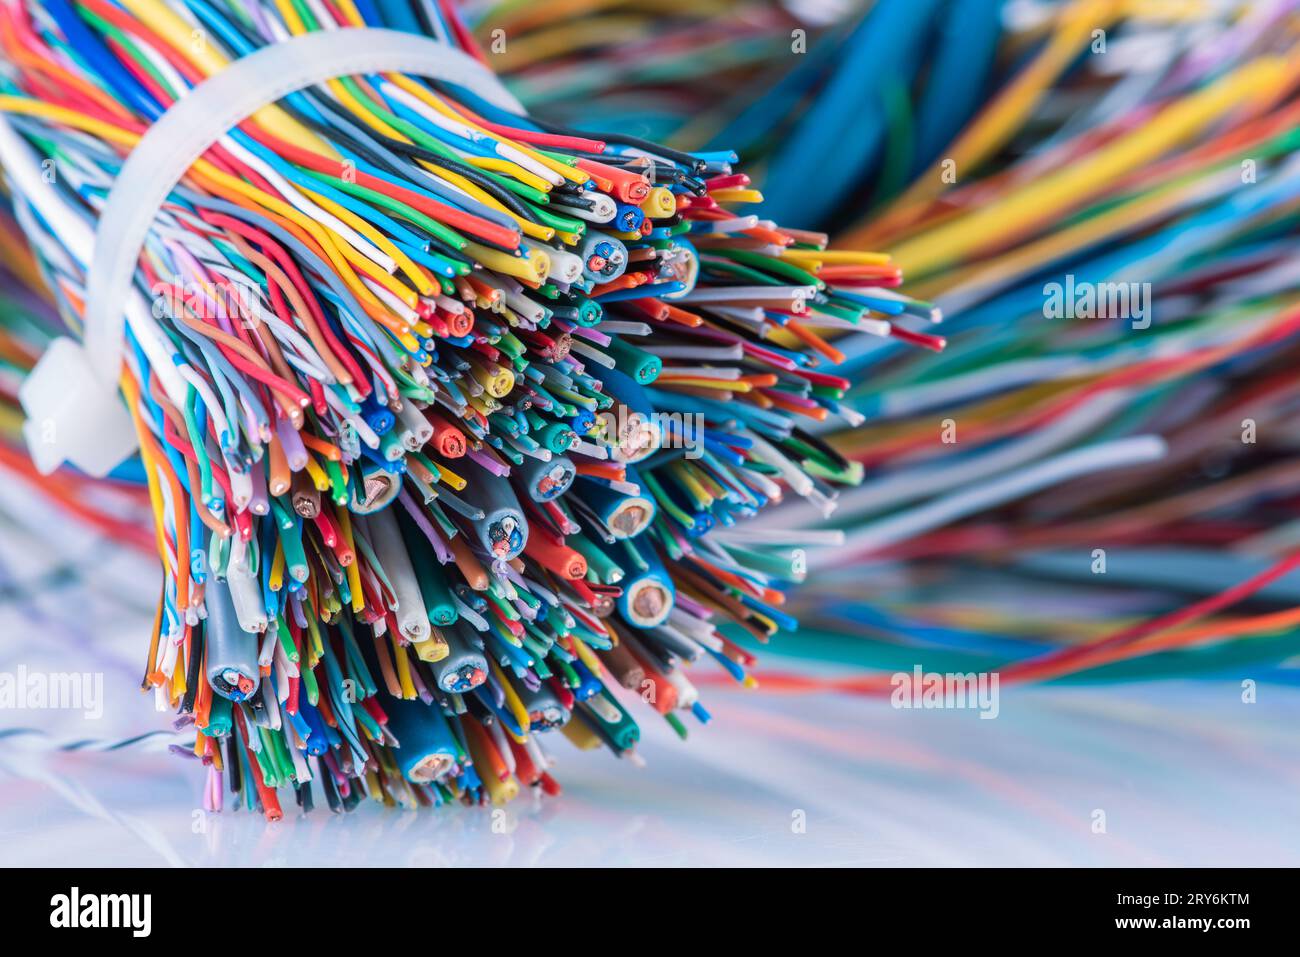 Colorful bundle of power copper electrical cable wire Stock Photo